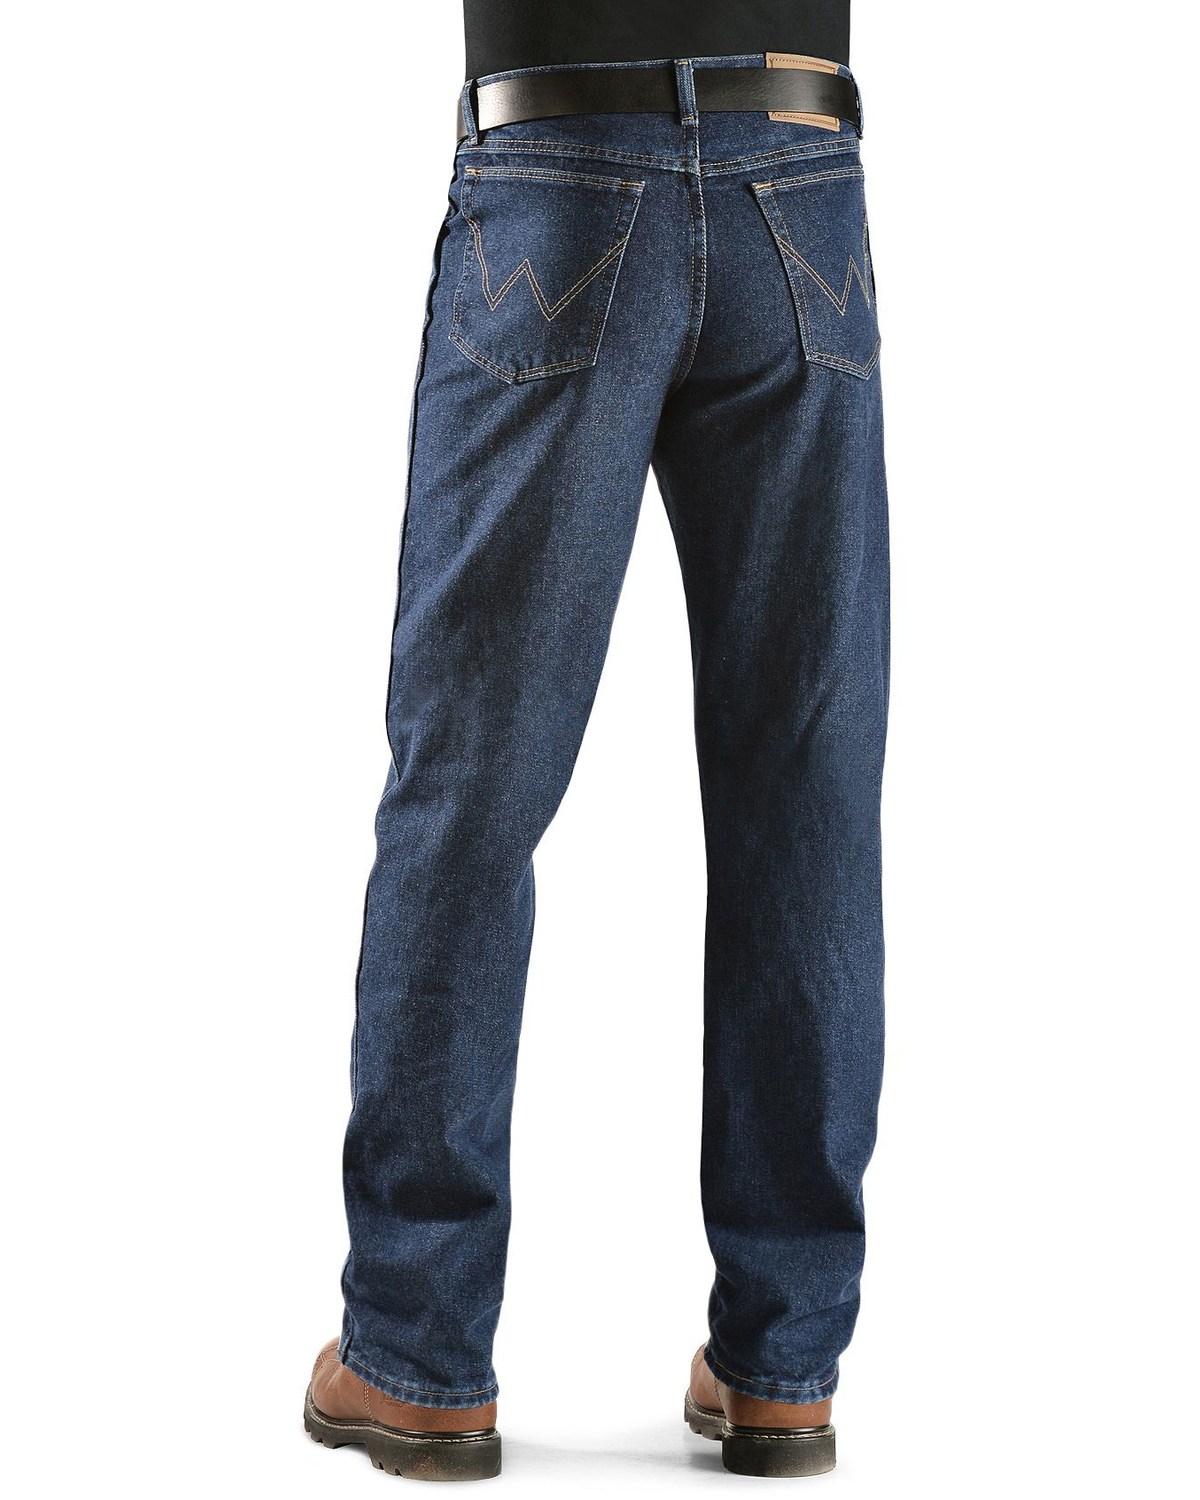 Wrangler Jeans - Rugged Wear Relaxed 